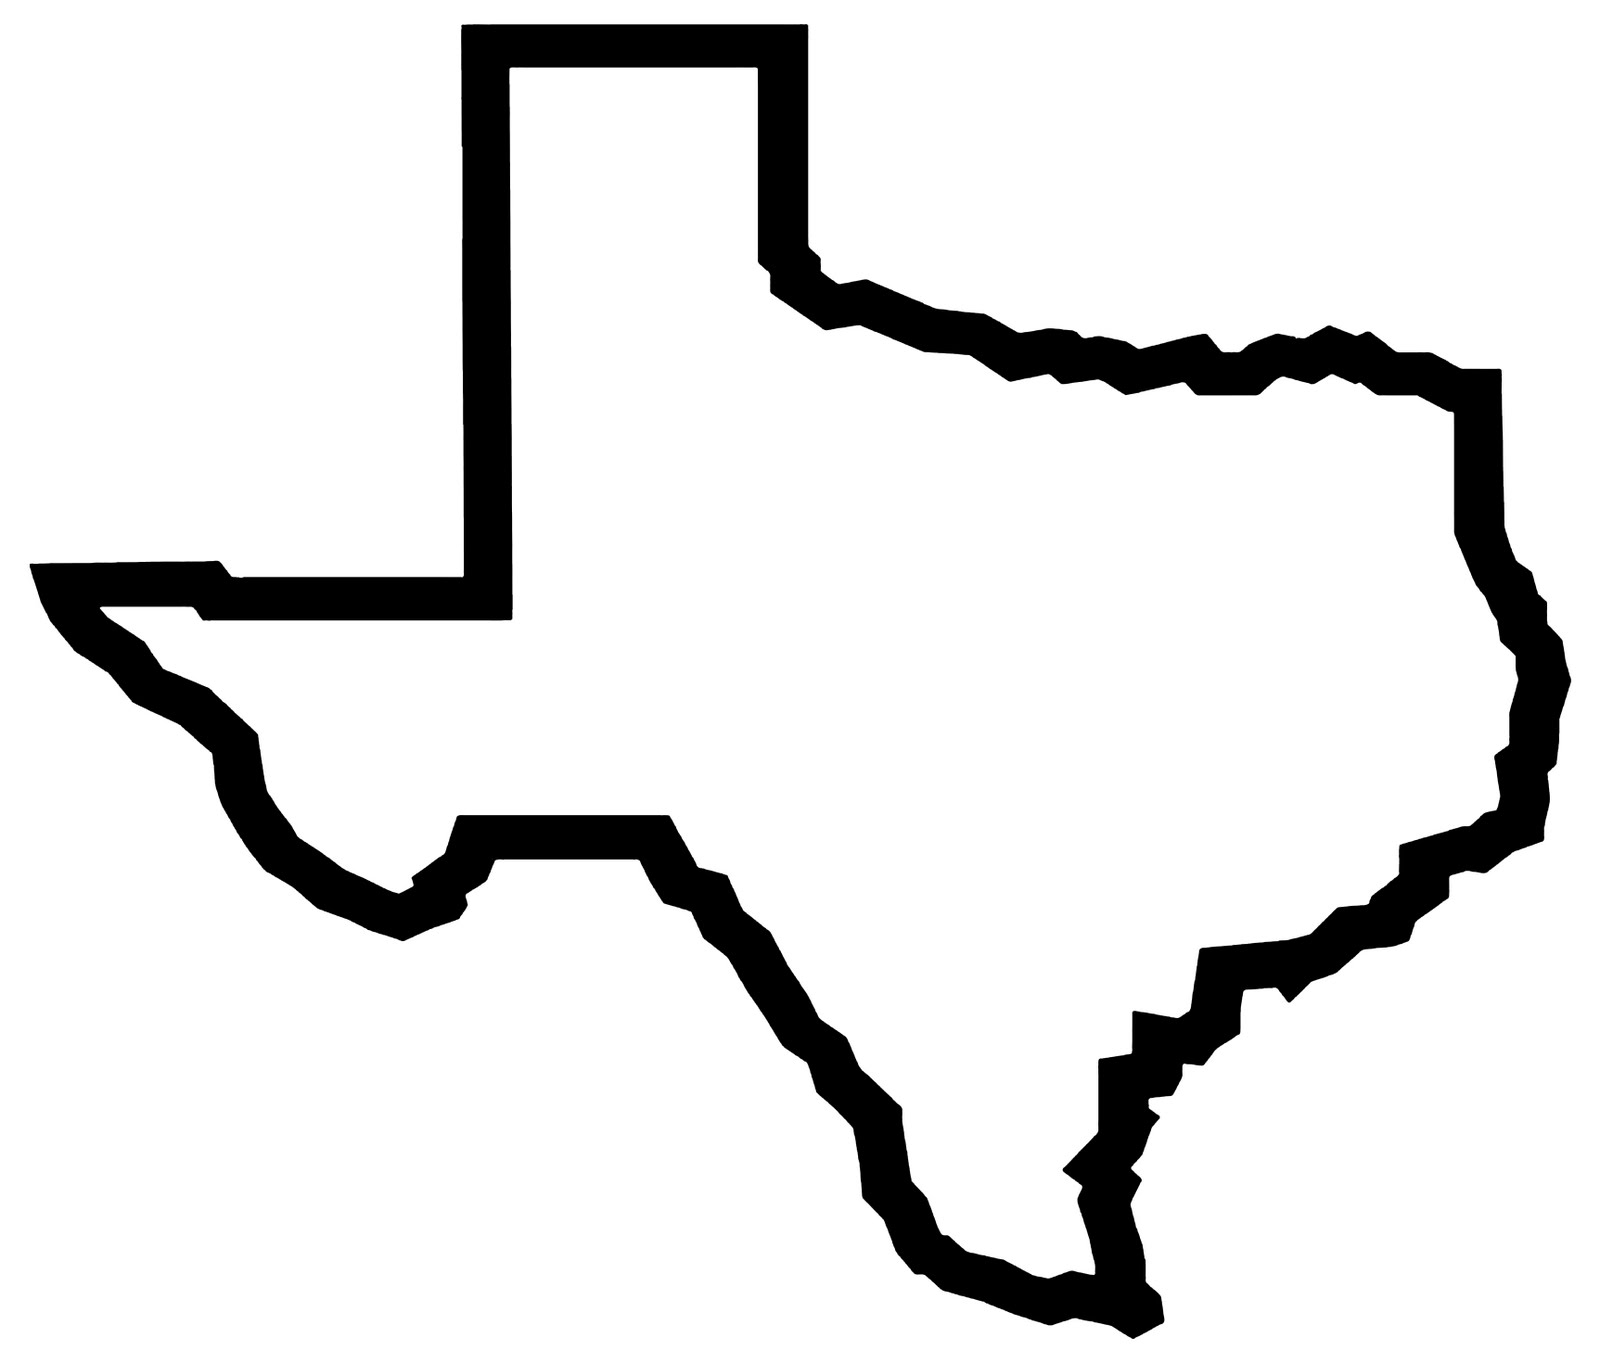 31 texas outline. | Clipart Panda - Free Clipart Images